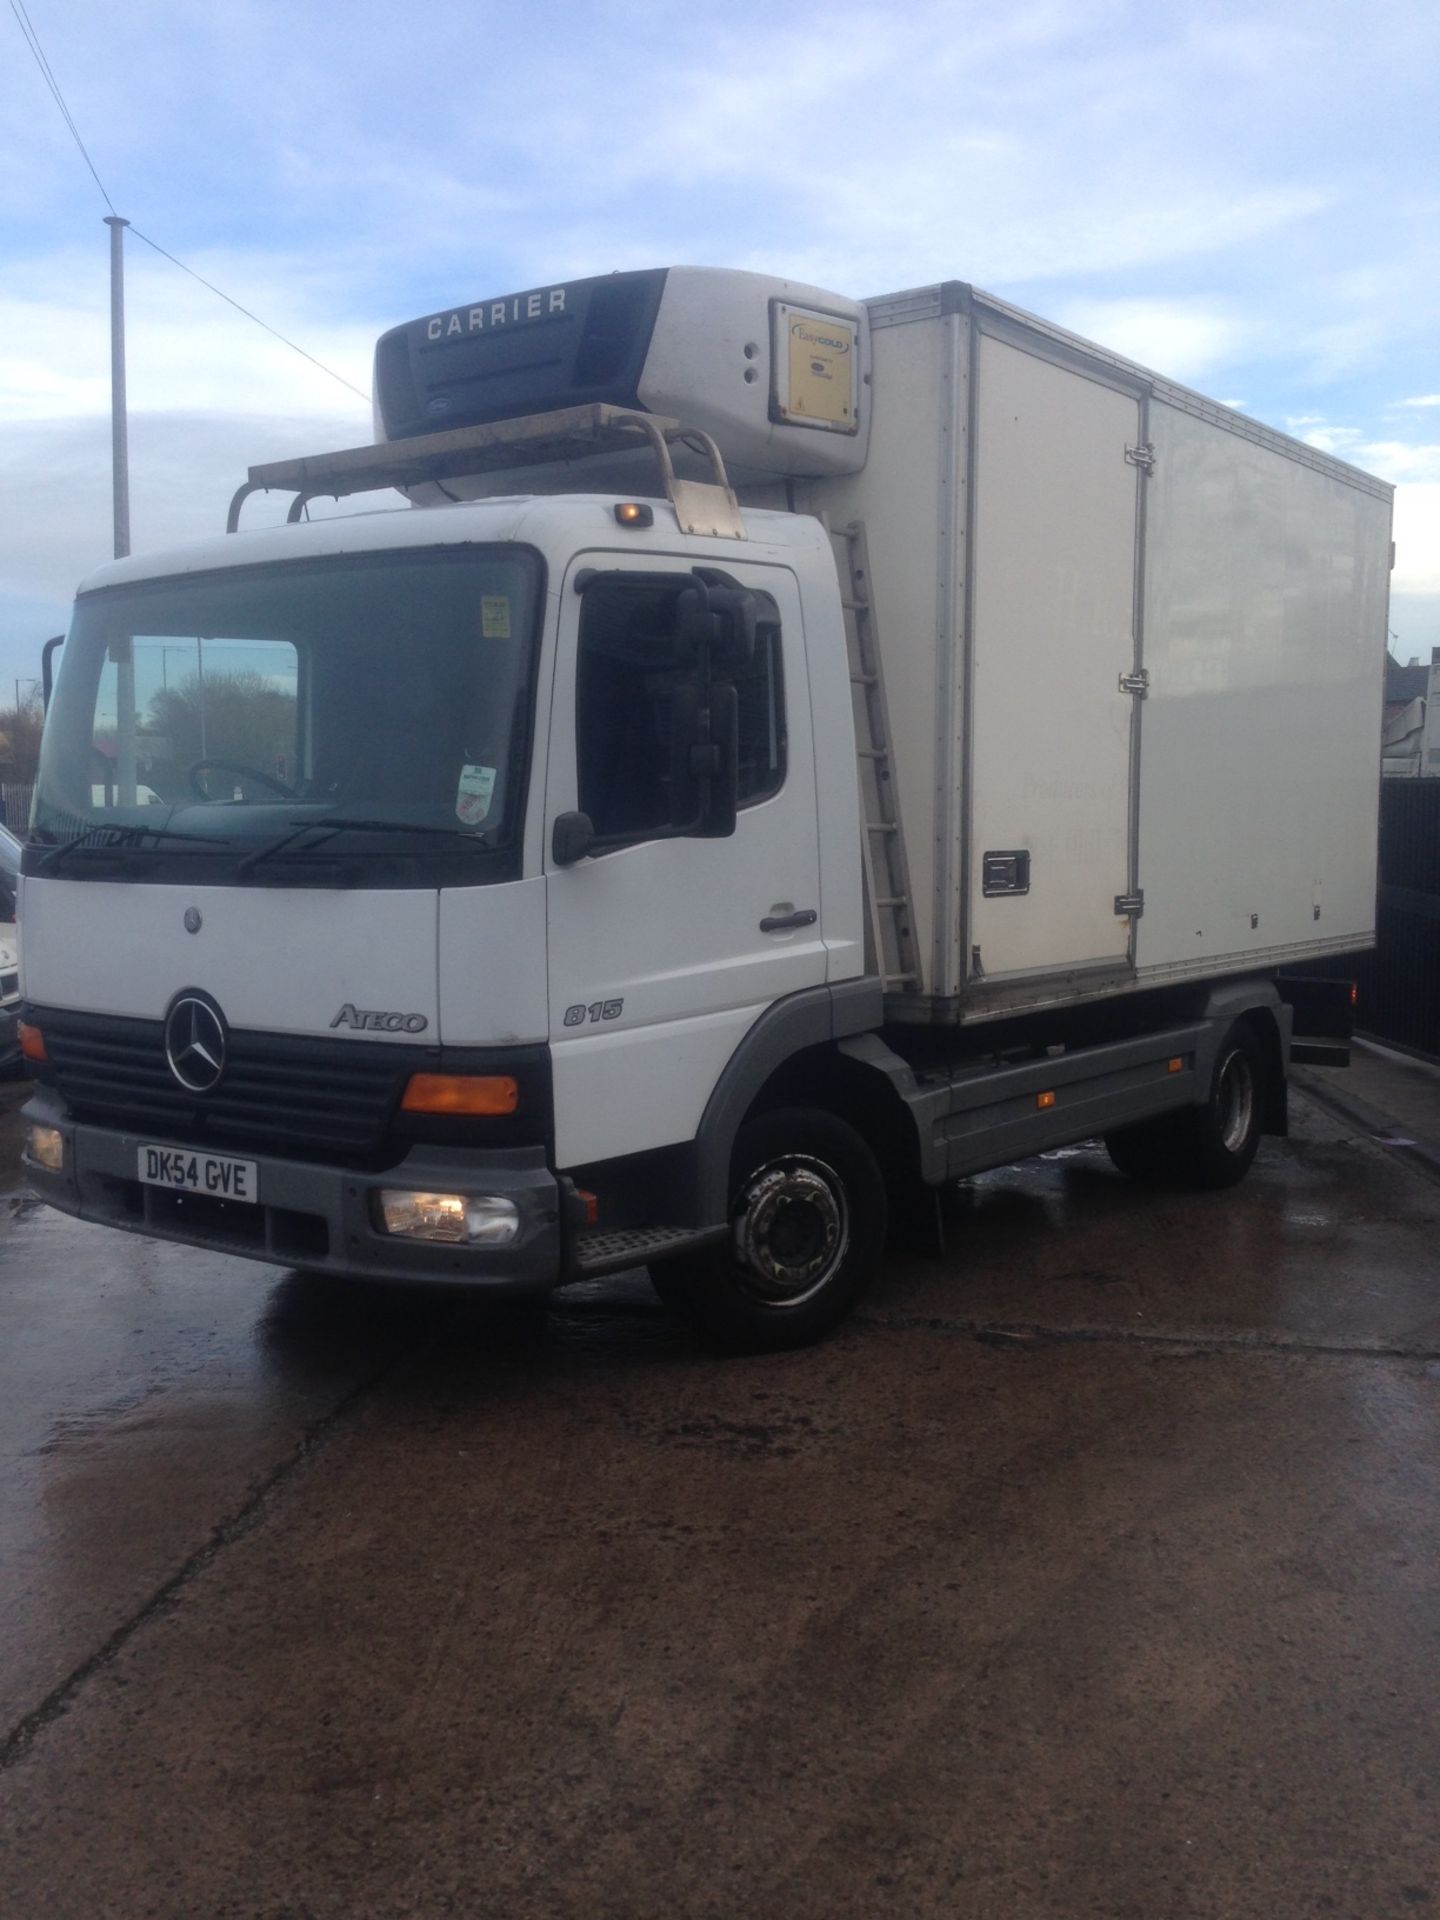 2004 54 MERCEDES ATEGO 815 REFRIGERATED 7.5 TON TRUCK - Image 2 of 5